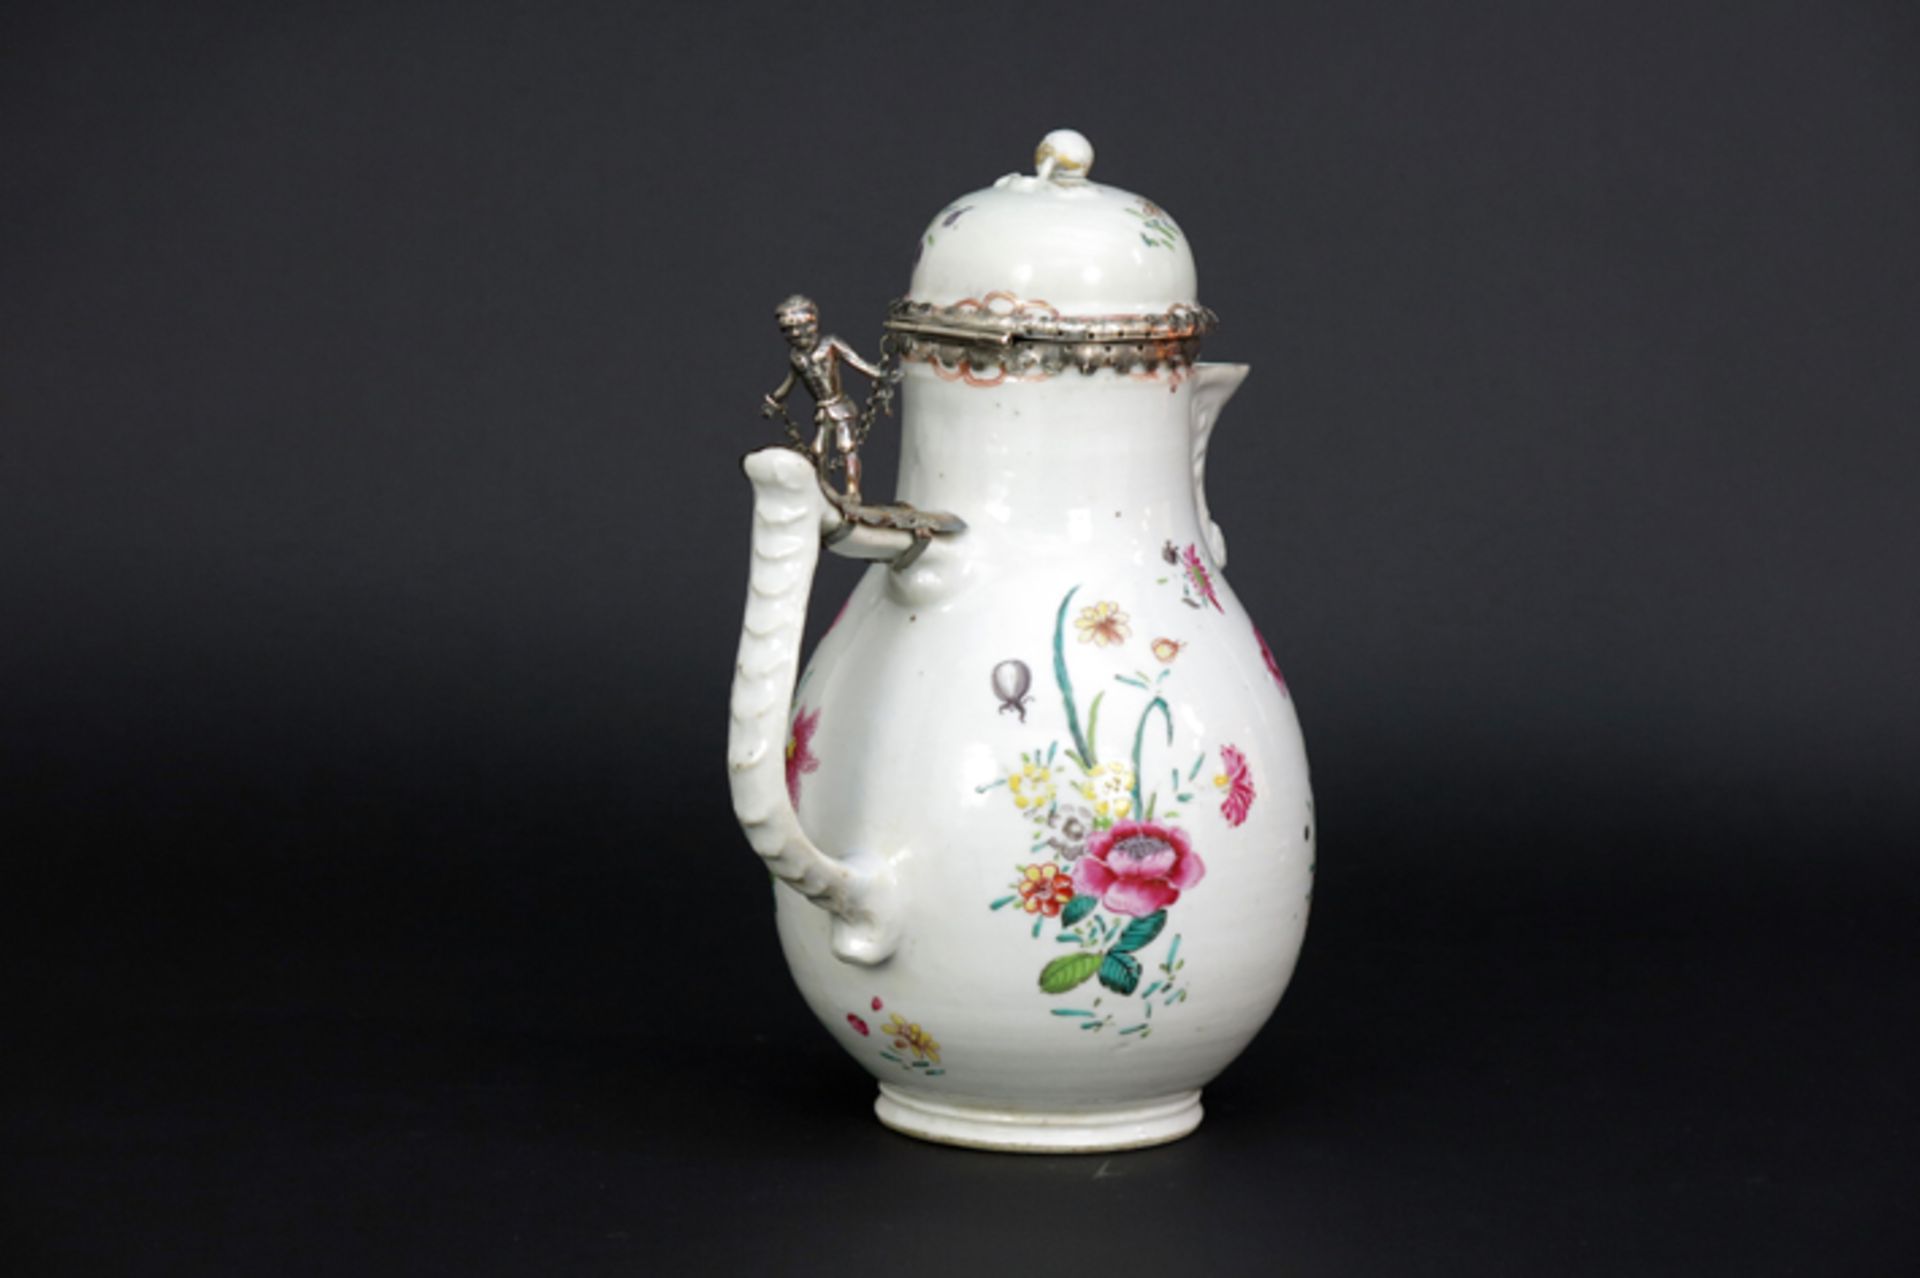 mid 18th Cent. Chinese coffeepot in porcelain with a nice decor with flowers and [...] - Image 3 of 6